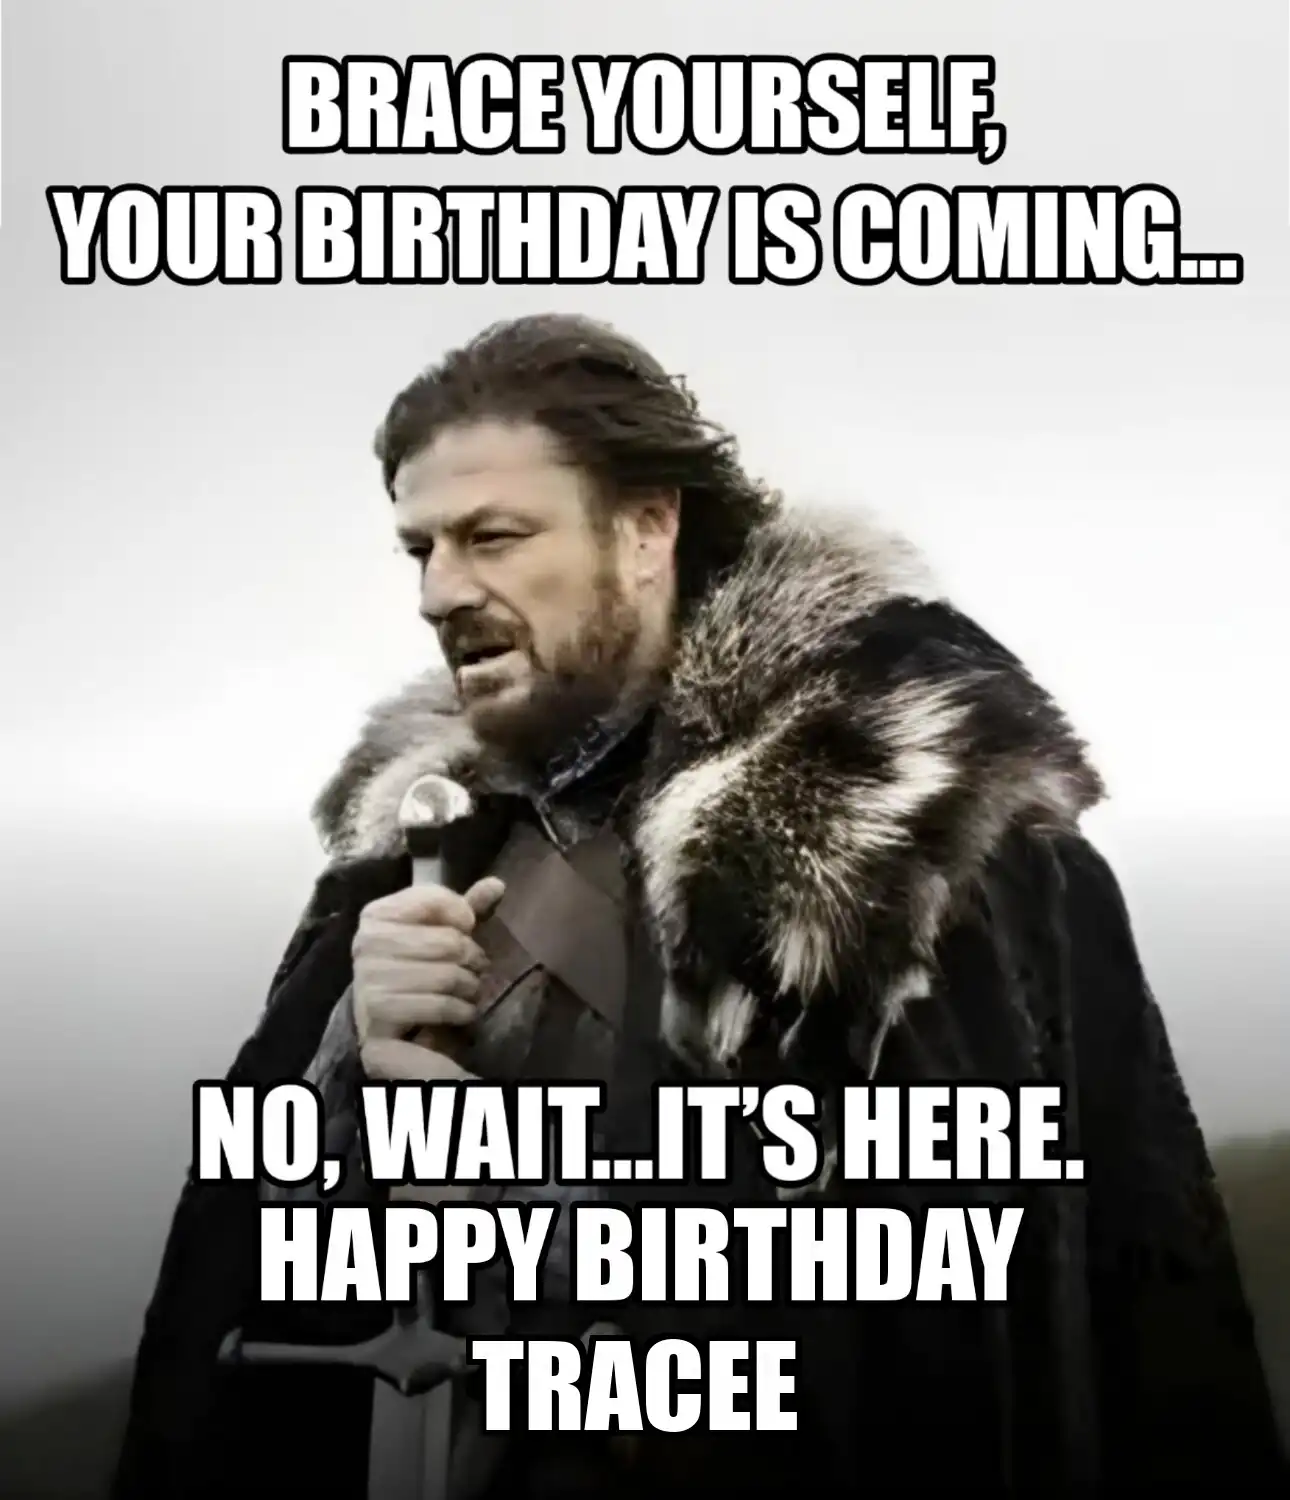 Happy Birthday Tracee Brace Yourself Your Birthday Is Coming Meme